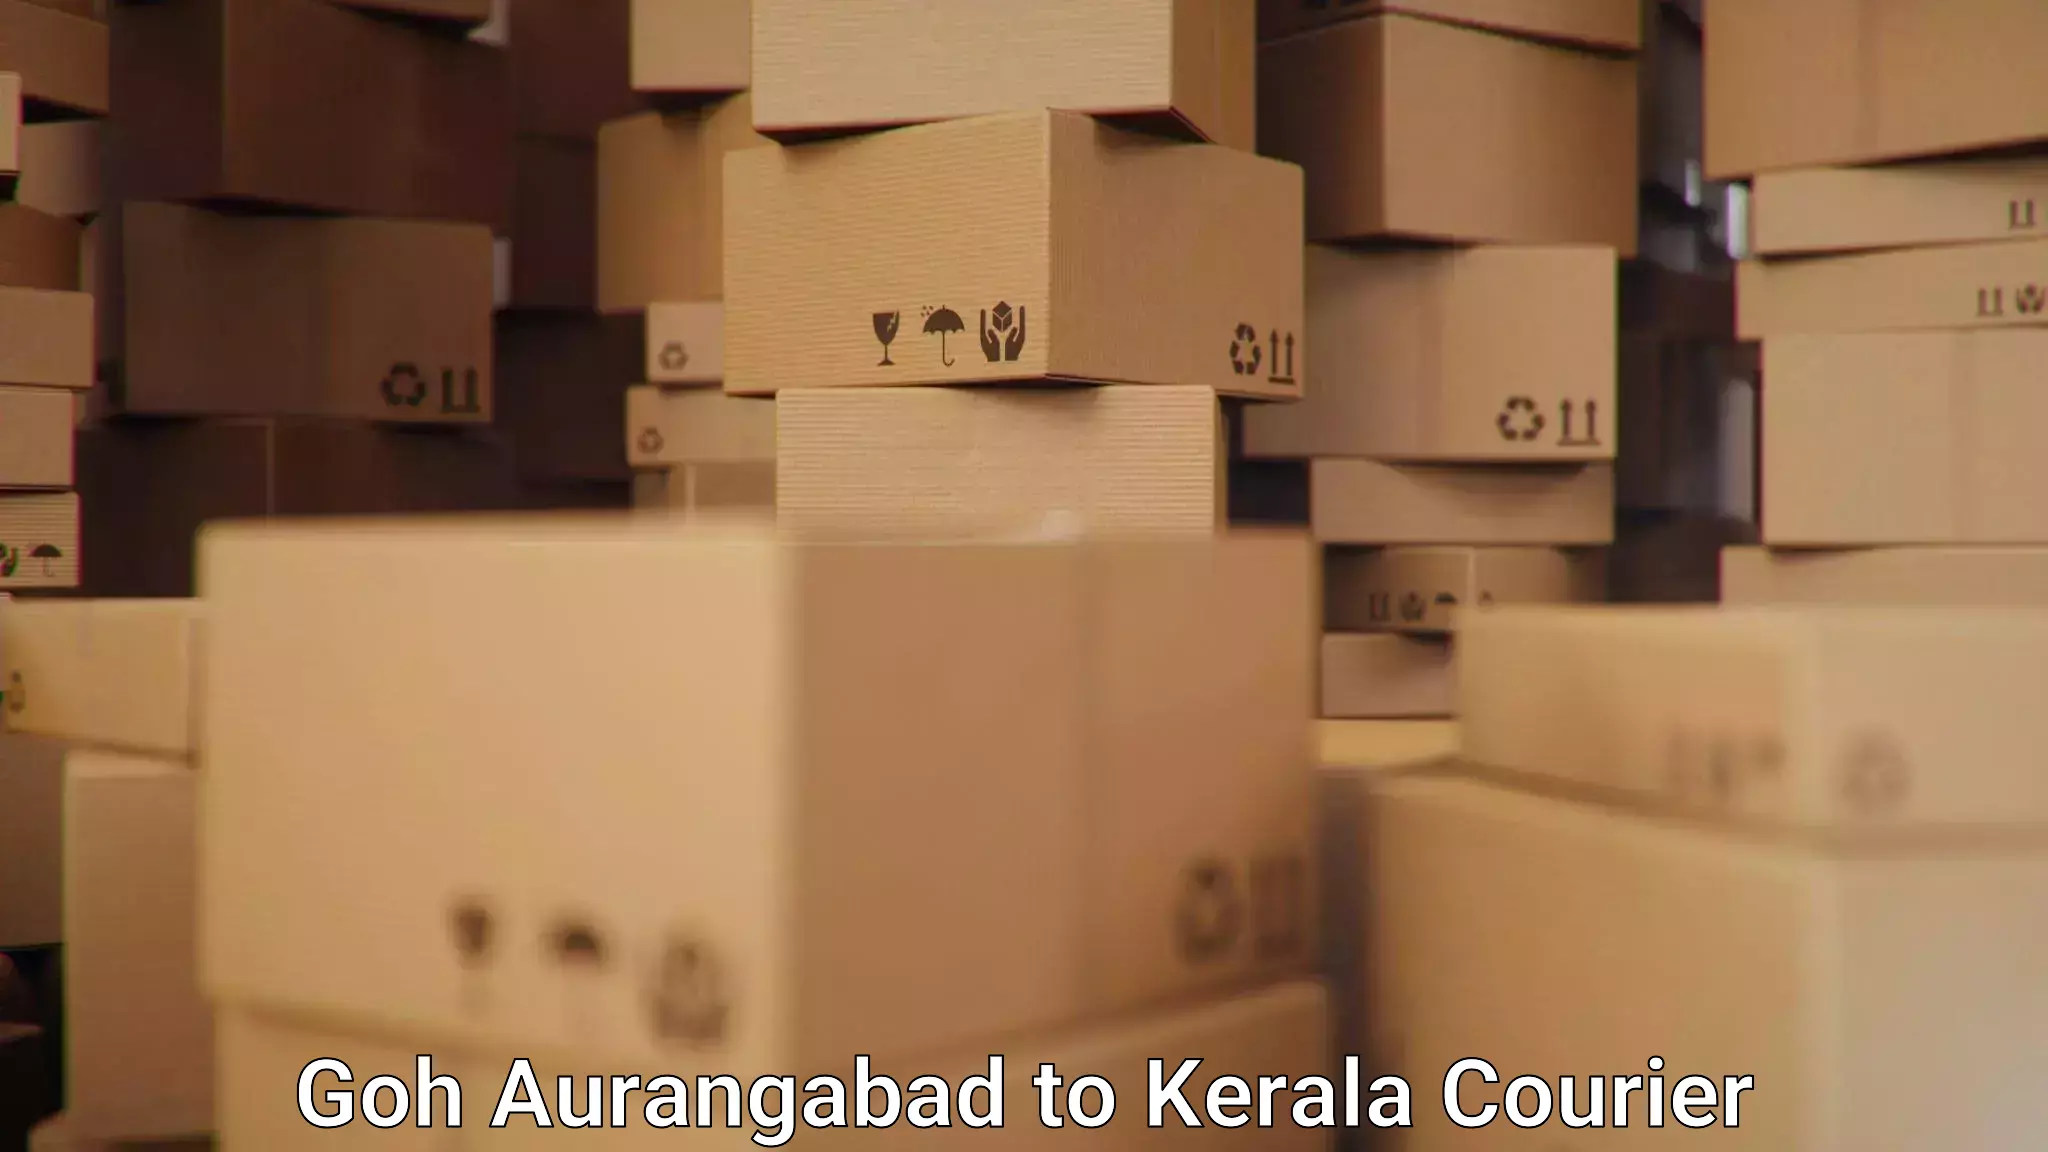 Quality courier partnerships Goh Aurangabad to Cochin University of Science and Technology